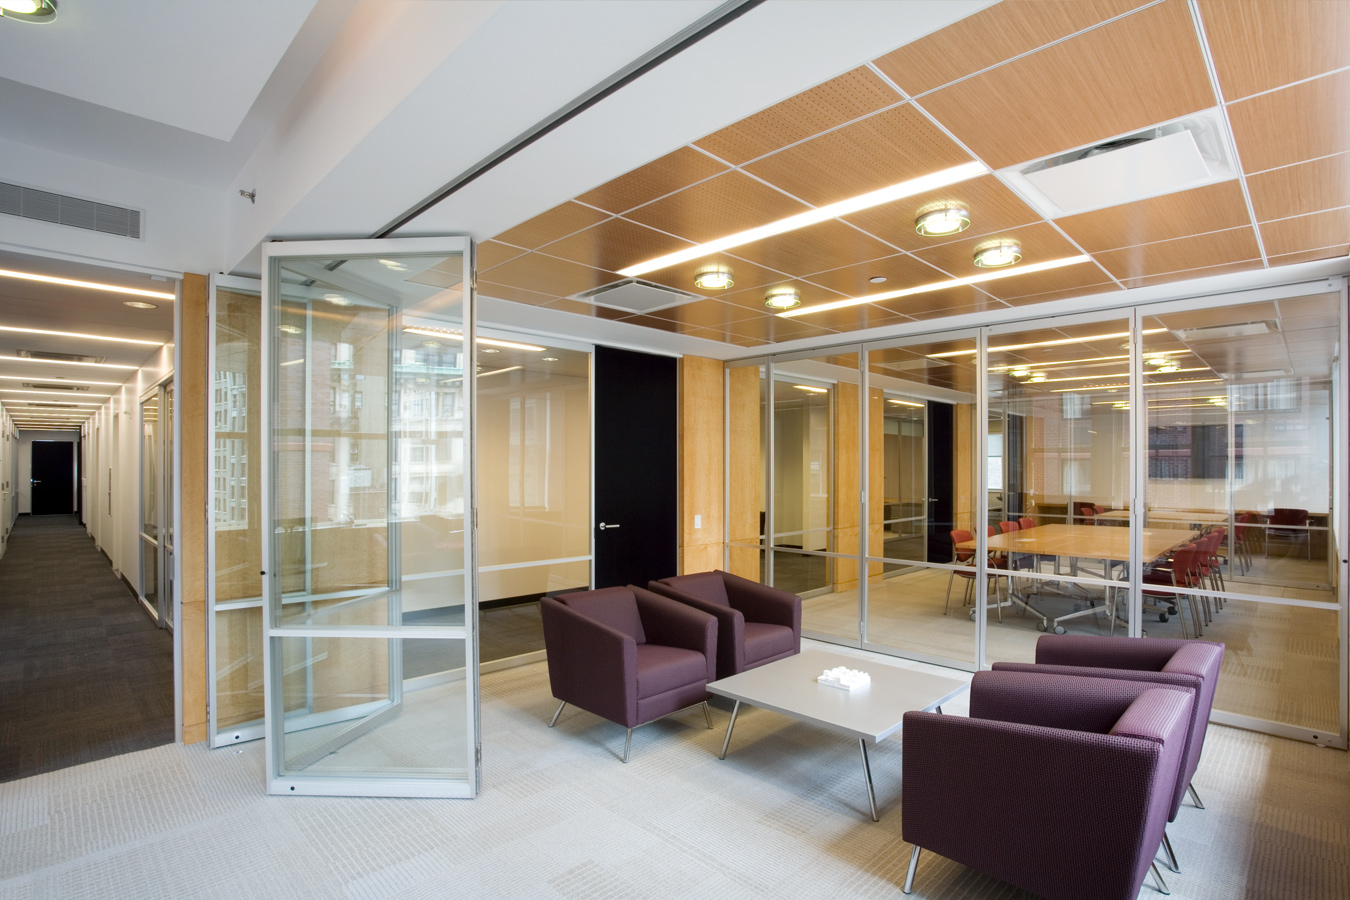 Project: Pontifical Society Offices - Folding Doors designed using PK-30 System